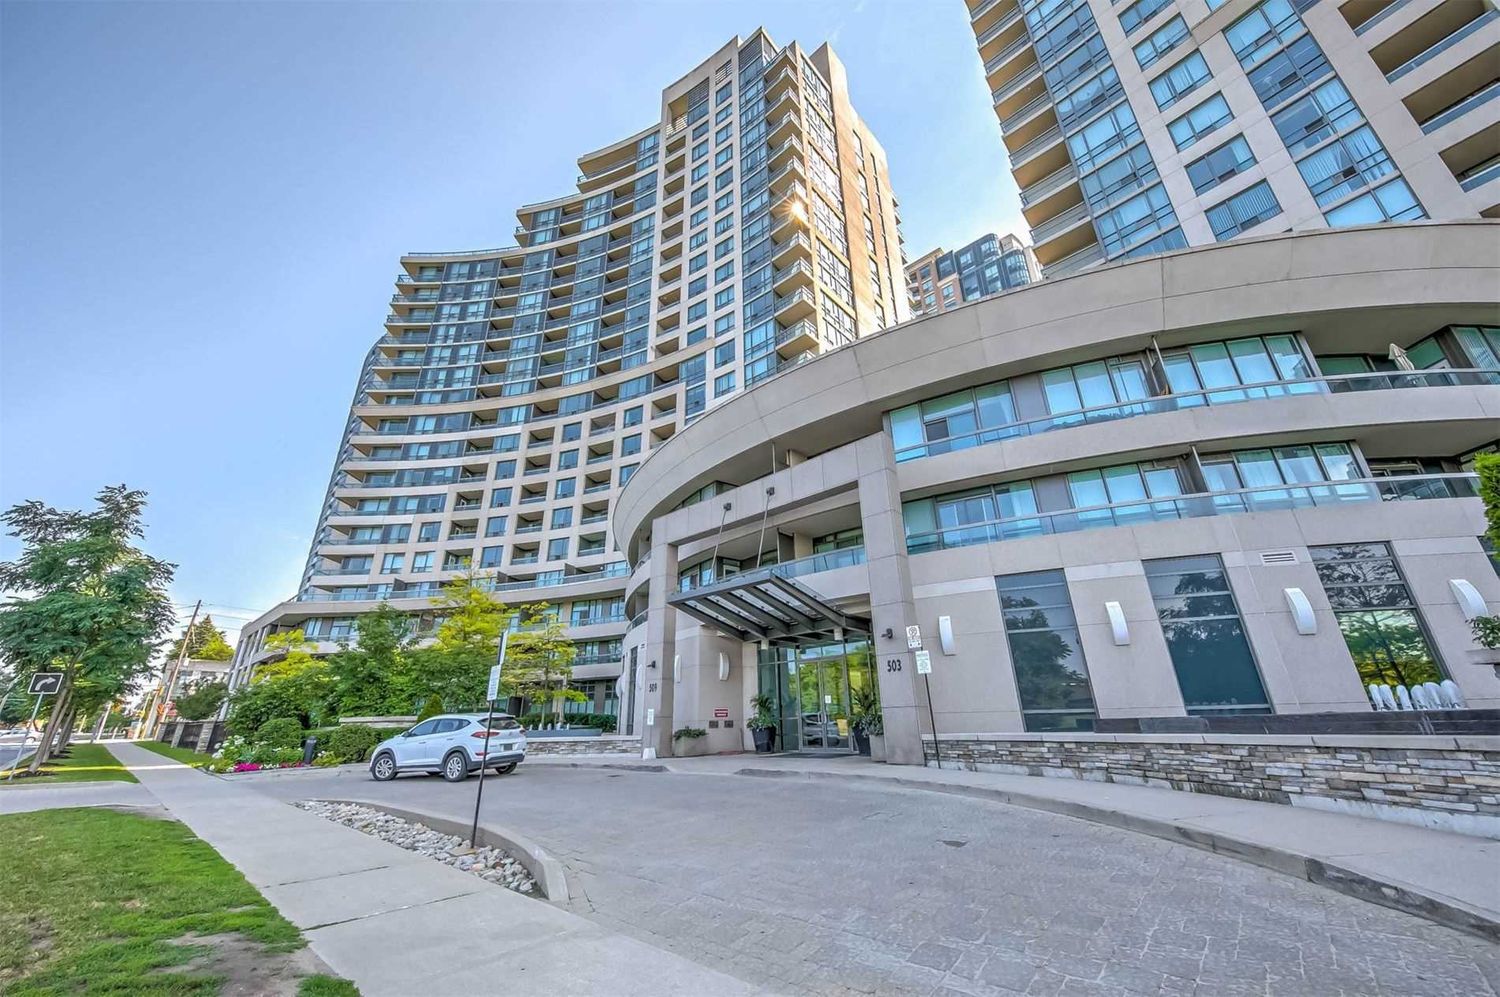 509 Beecroft Road. The Continental Condos is located in  North York, Toronto - image #2 of 2